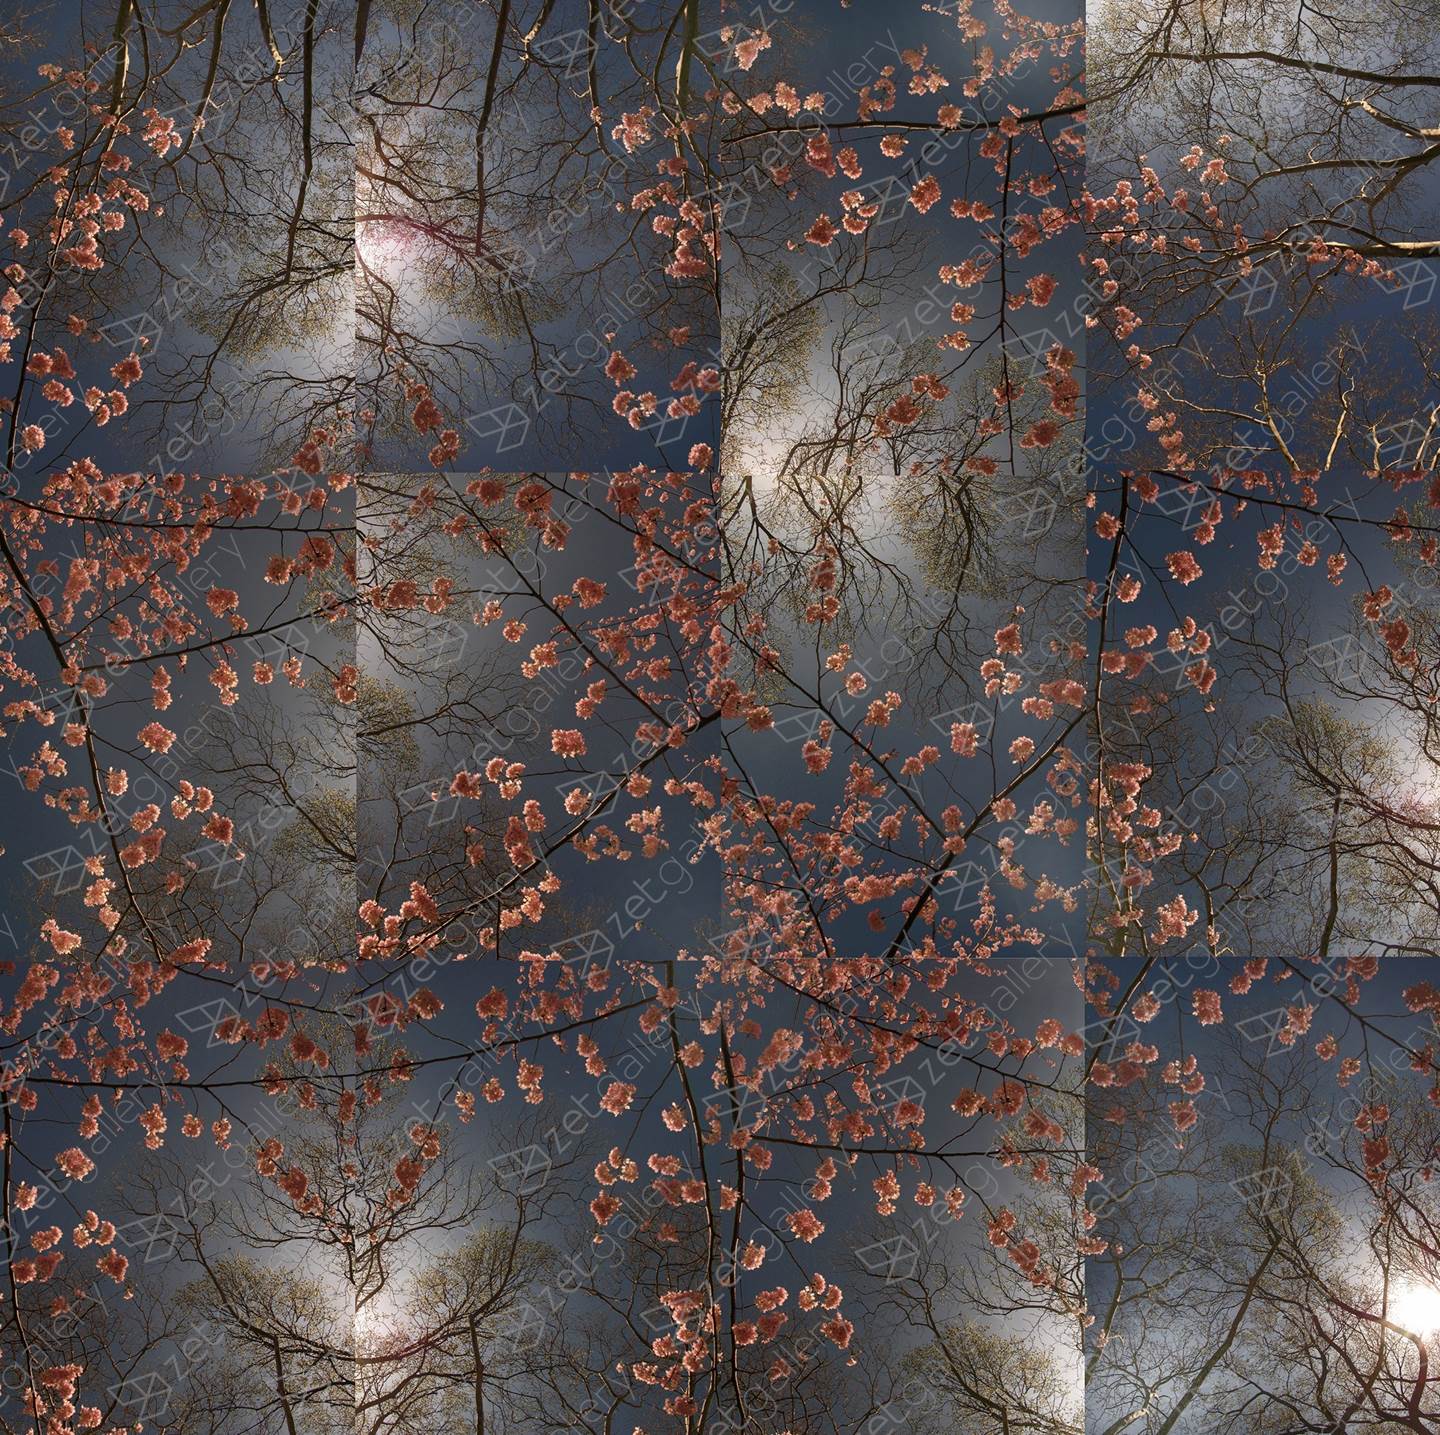 Early Spring - Cherry Blossom Bloom Opus 2, original   Photography by Shimon and Tammar Rothstein 